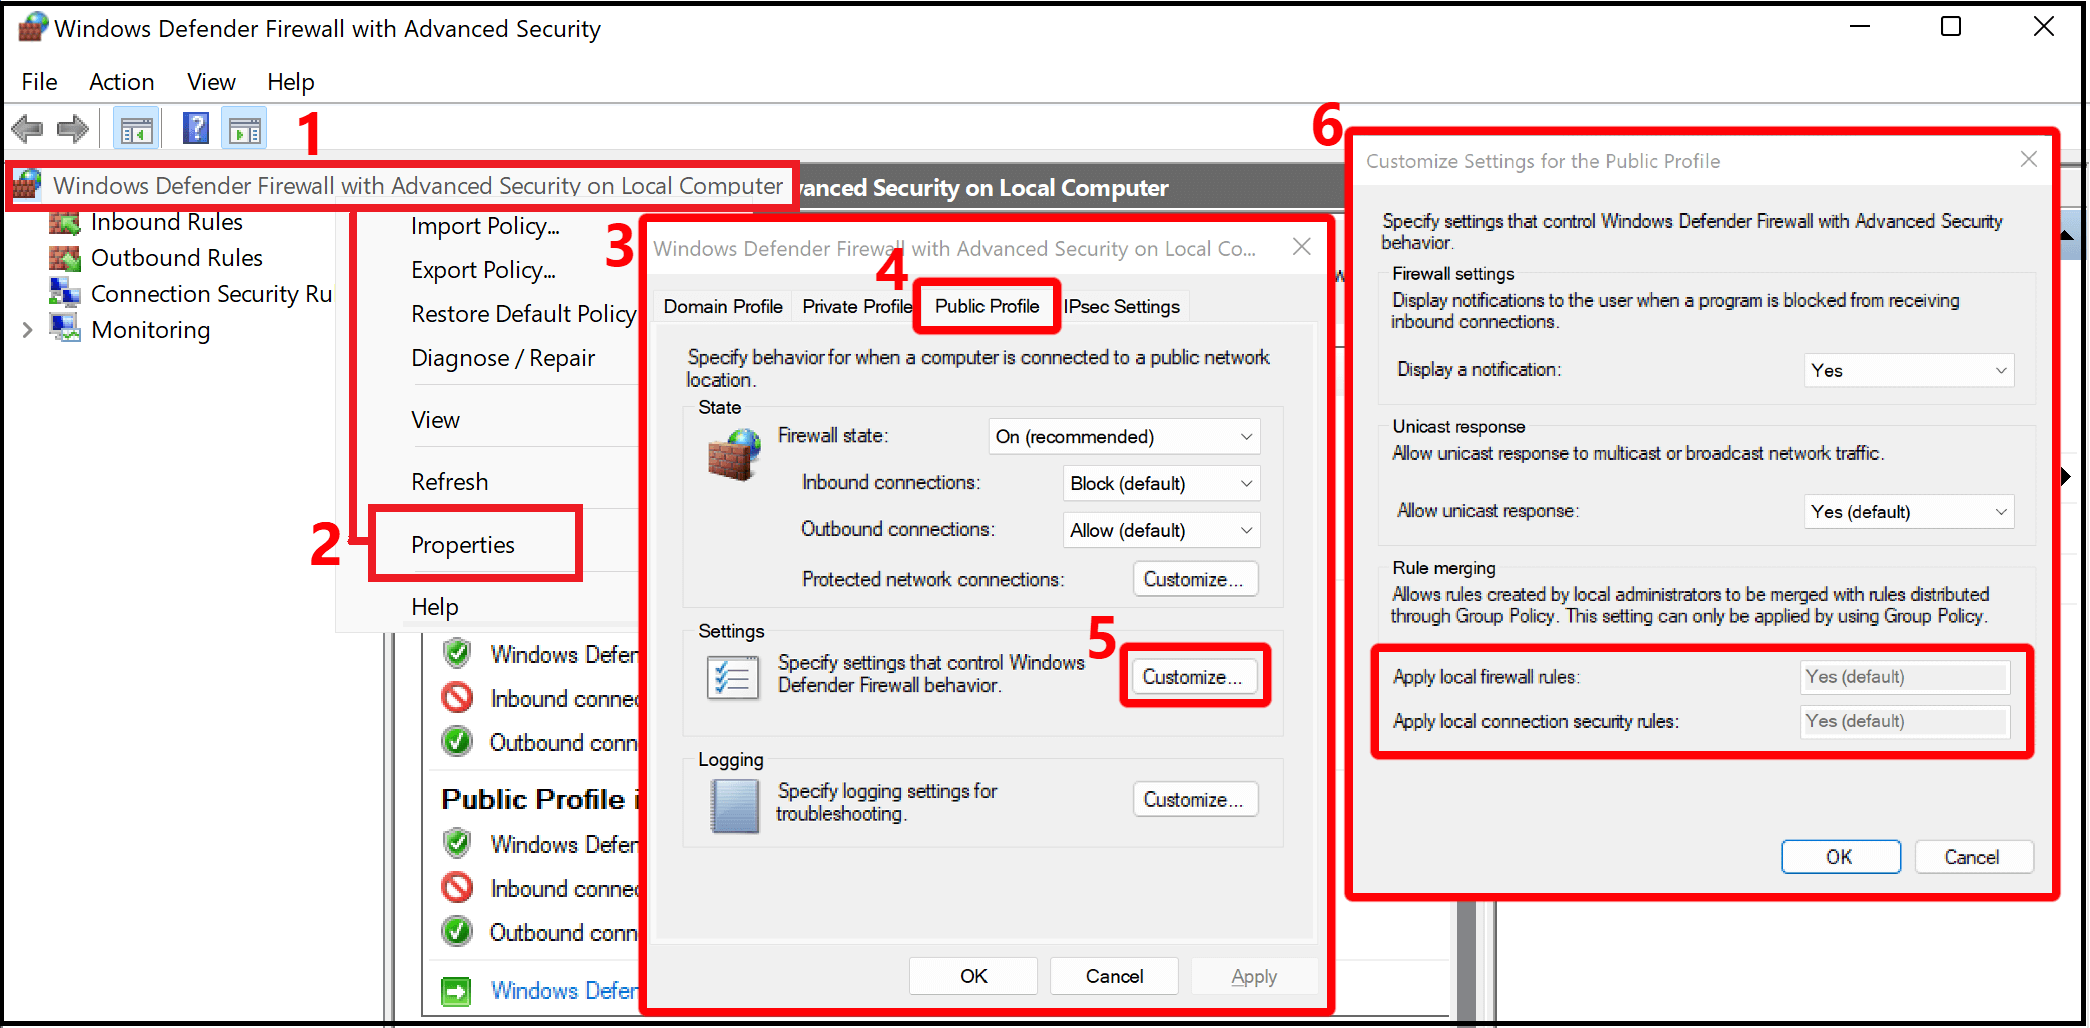 Click on Allow an app or feature through Windows Firewall on the left side of the window.
Ensure that Bitdefender VPN is listed and has both Private and Public checkboxes selected. If not, click on the Change settings button, then tick the checkboxes next to Bitdefender VPN. Click OK to save the changes.